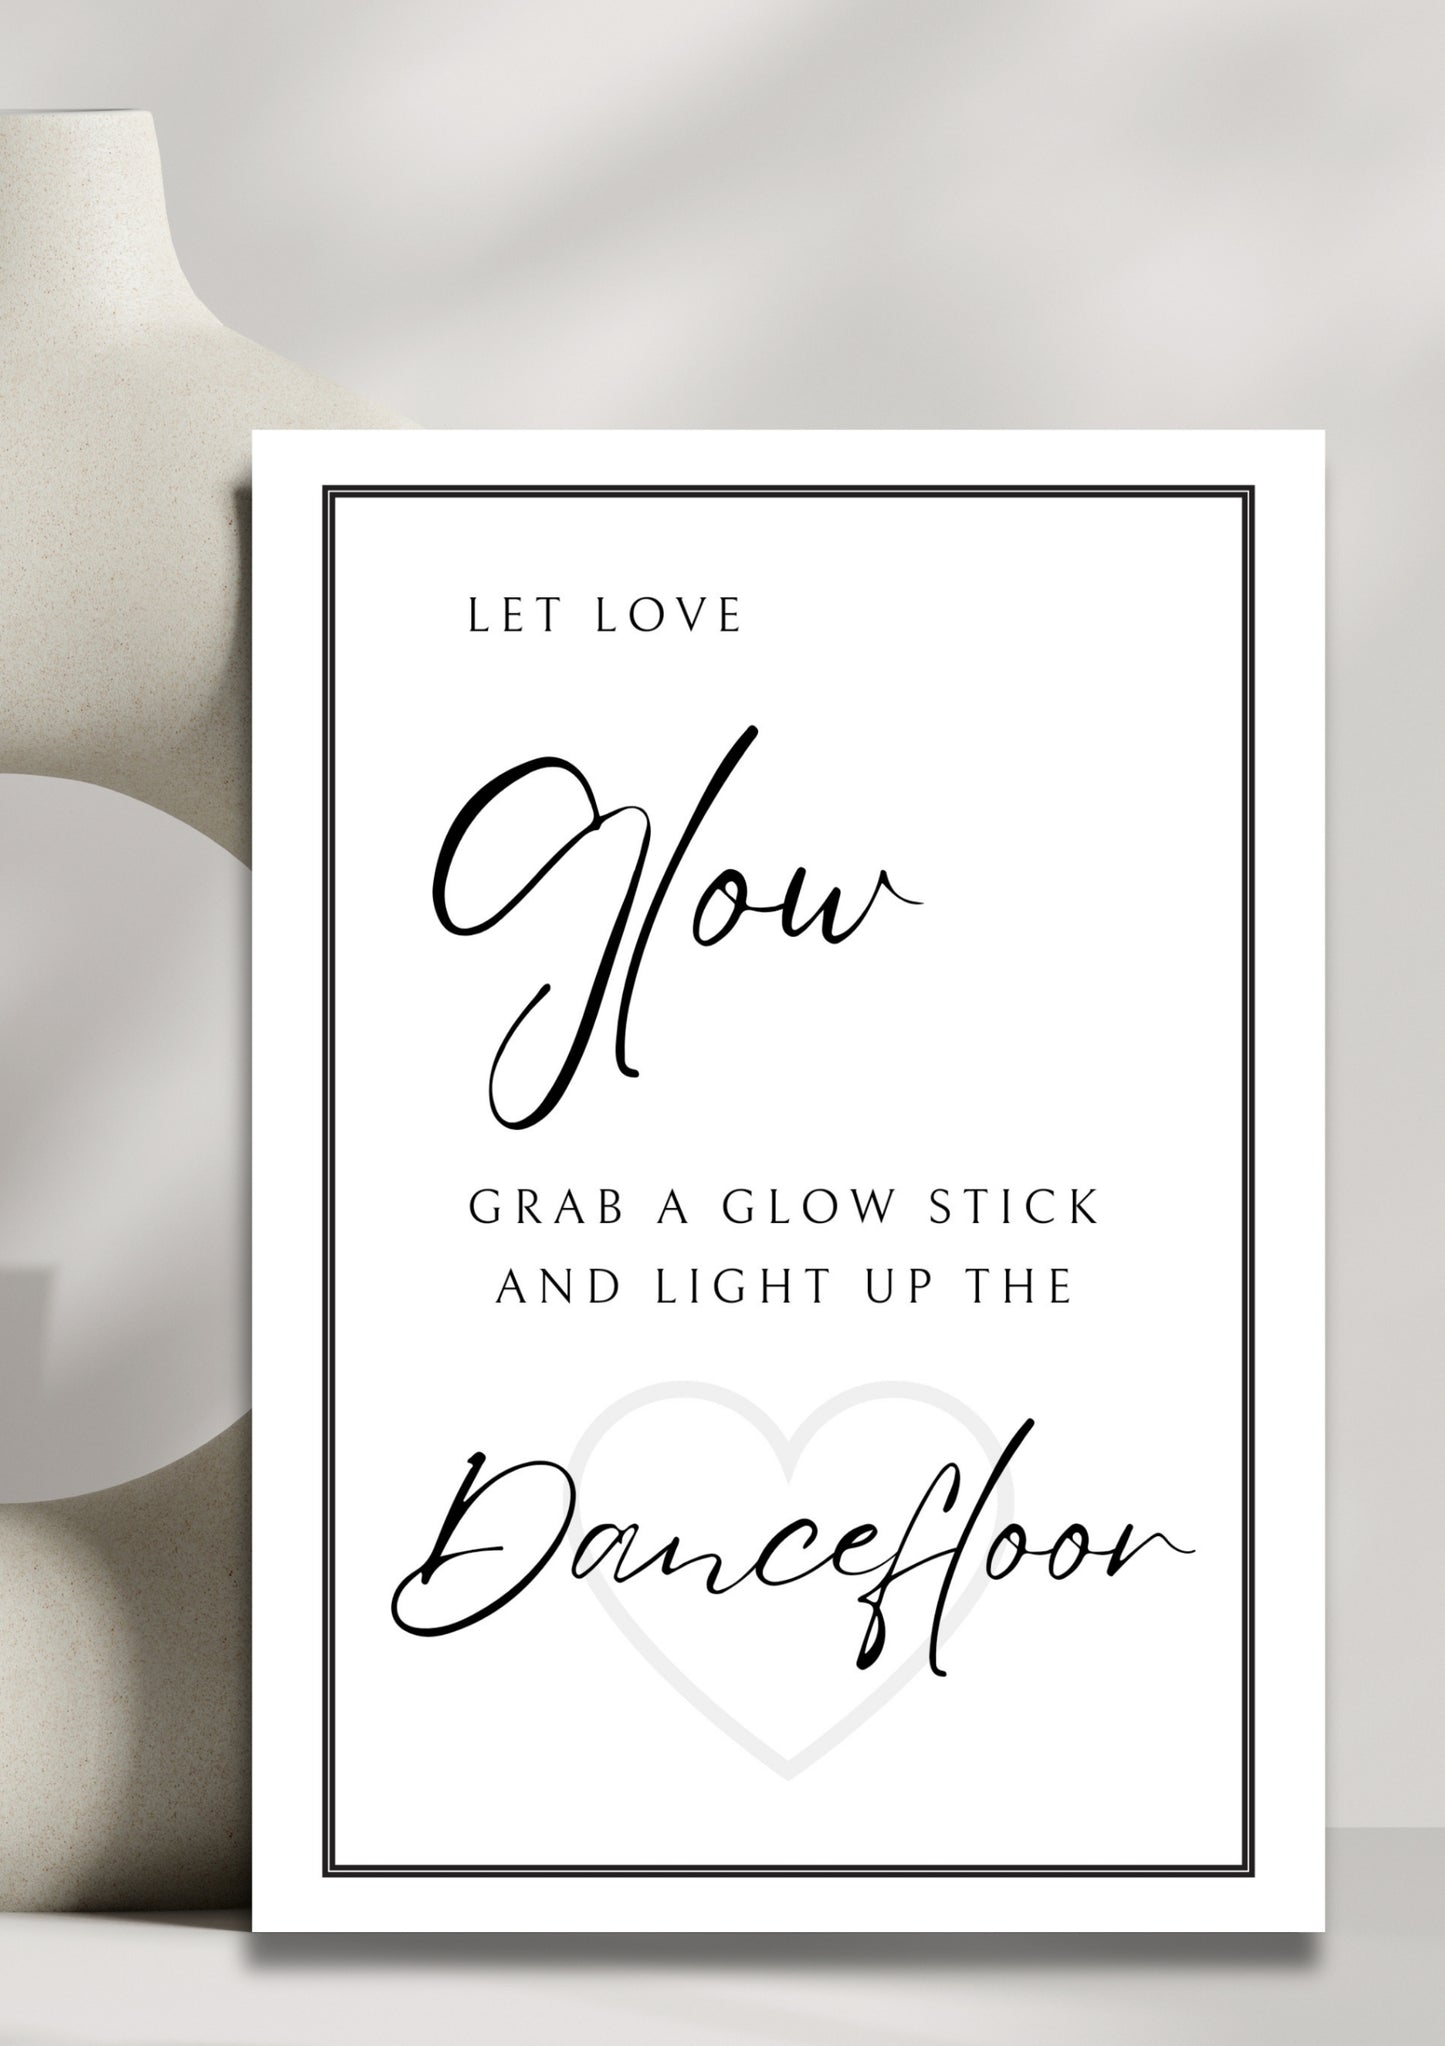 White stone collection - Glow stick sign